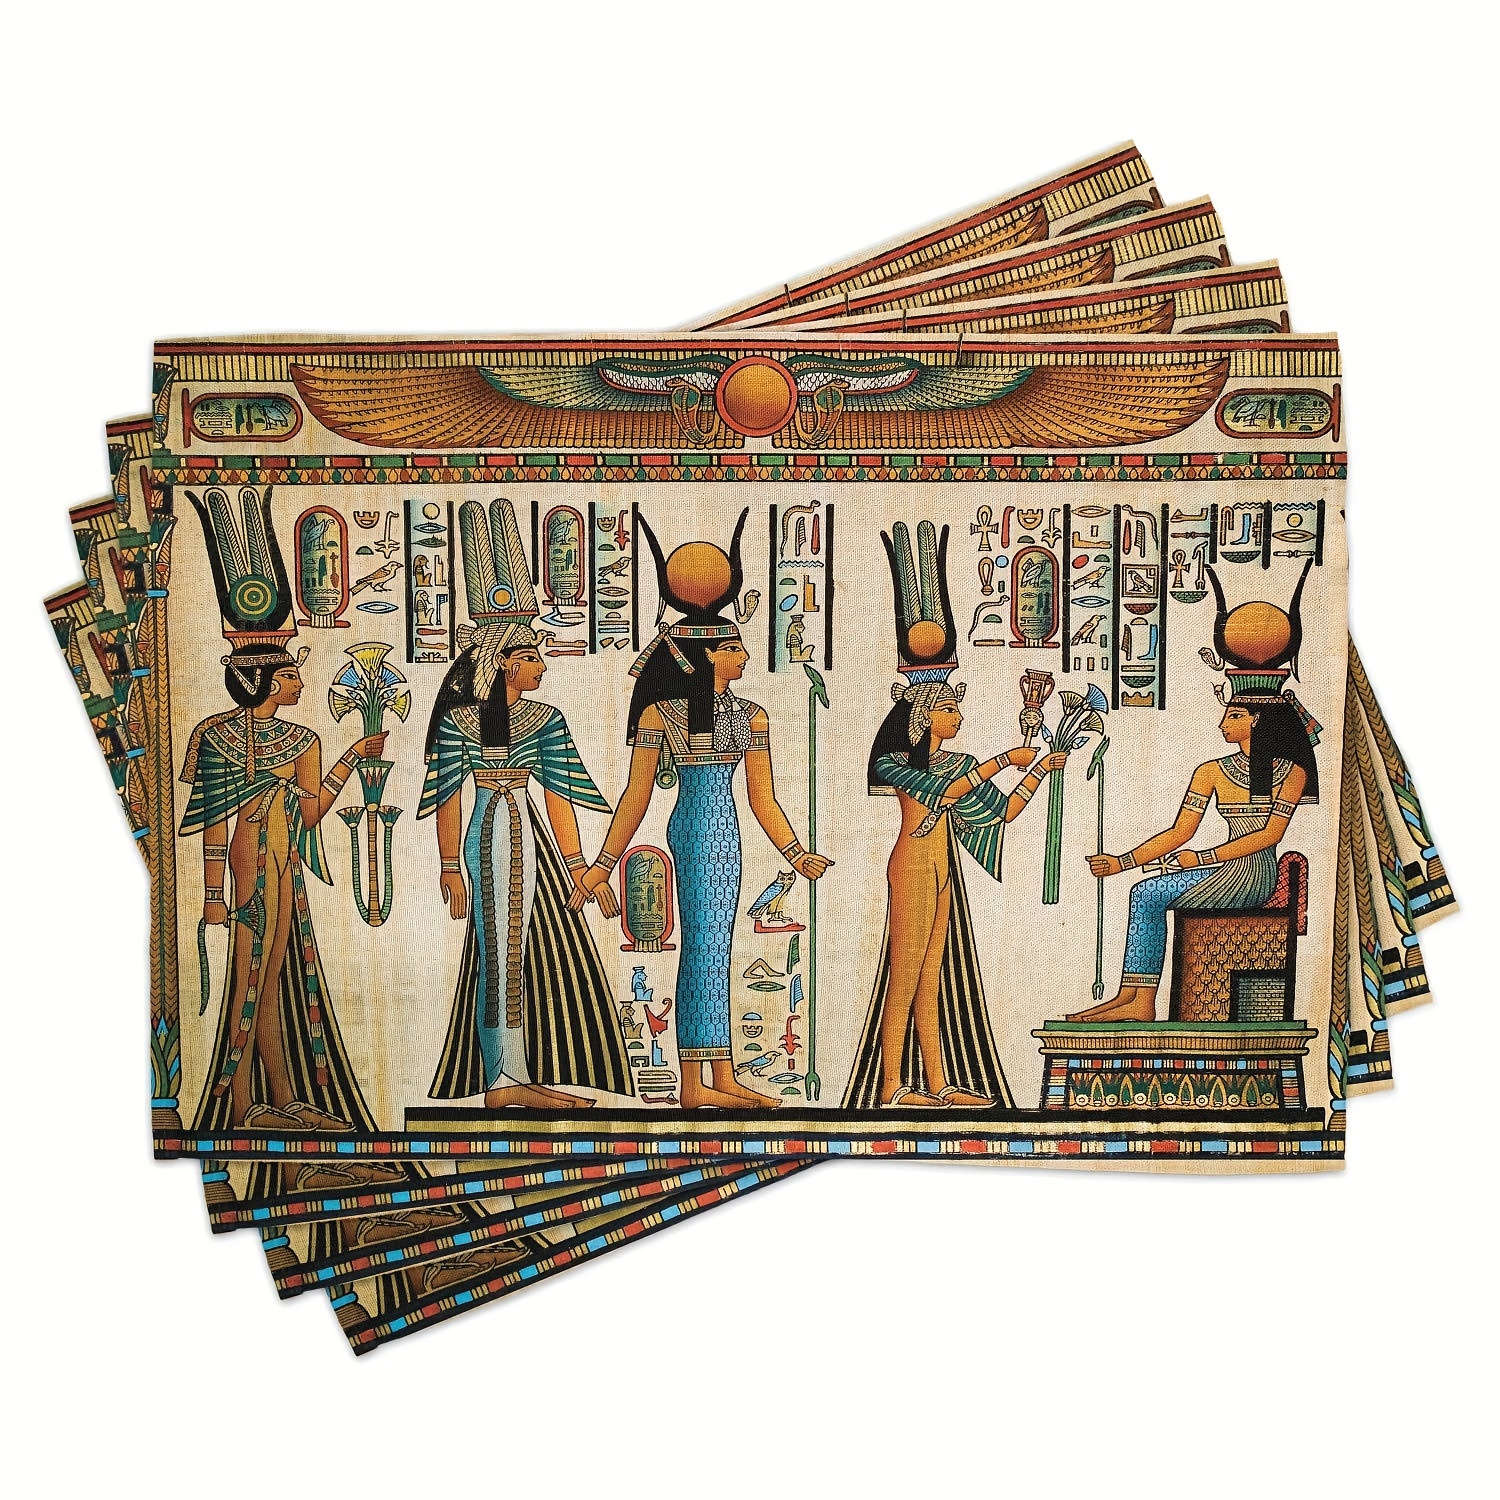 

Egyptian Papyrus Pattern Placemats Set Of 4 - Polyester Dining Table Mats 12x18 Inches, Machine Washable, Woven Rectangle Tableware Mat For Home Decor